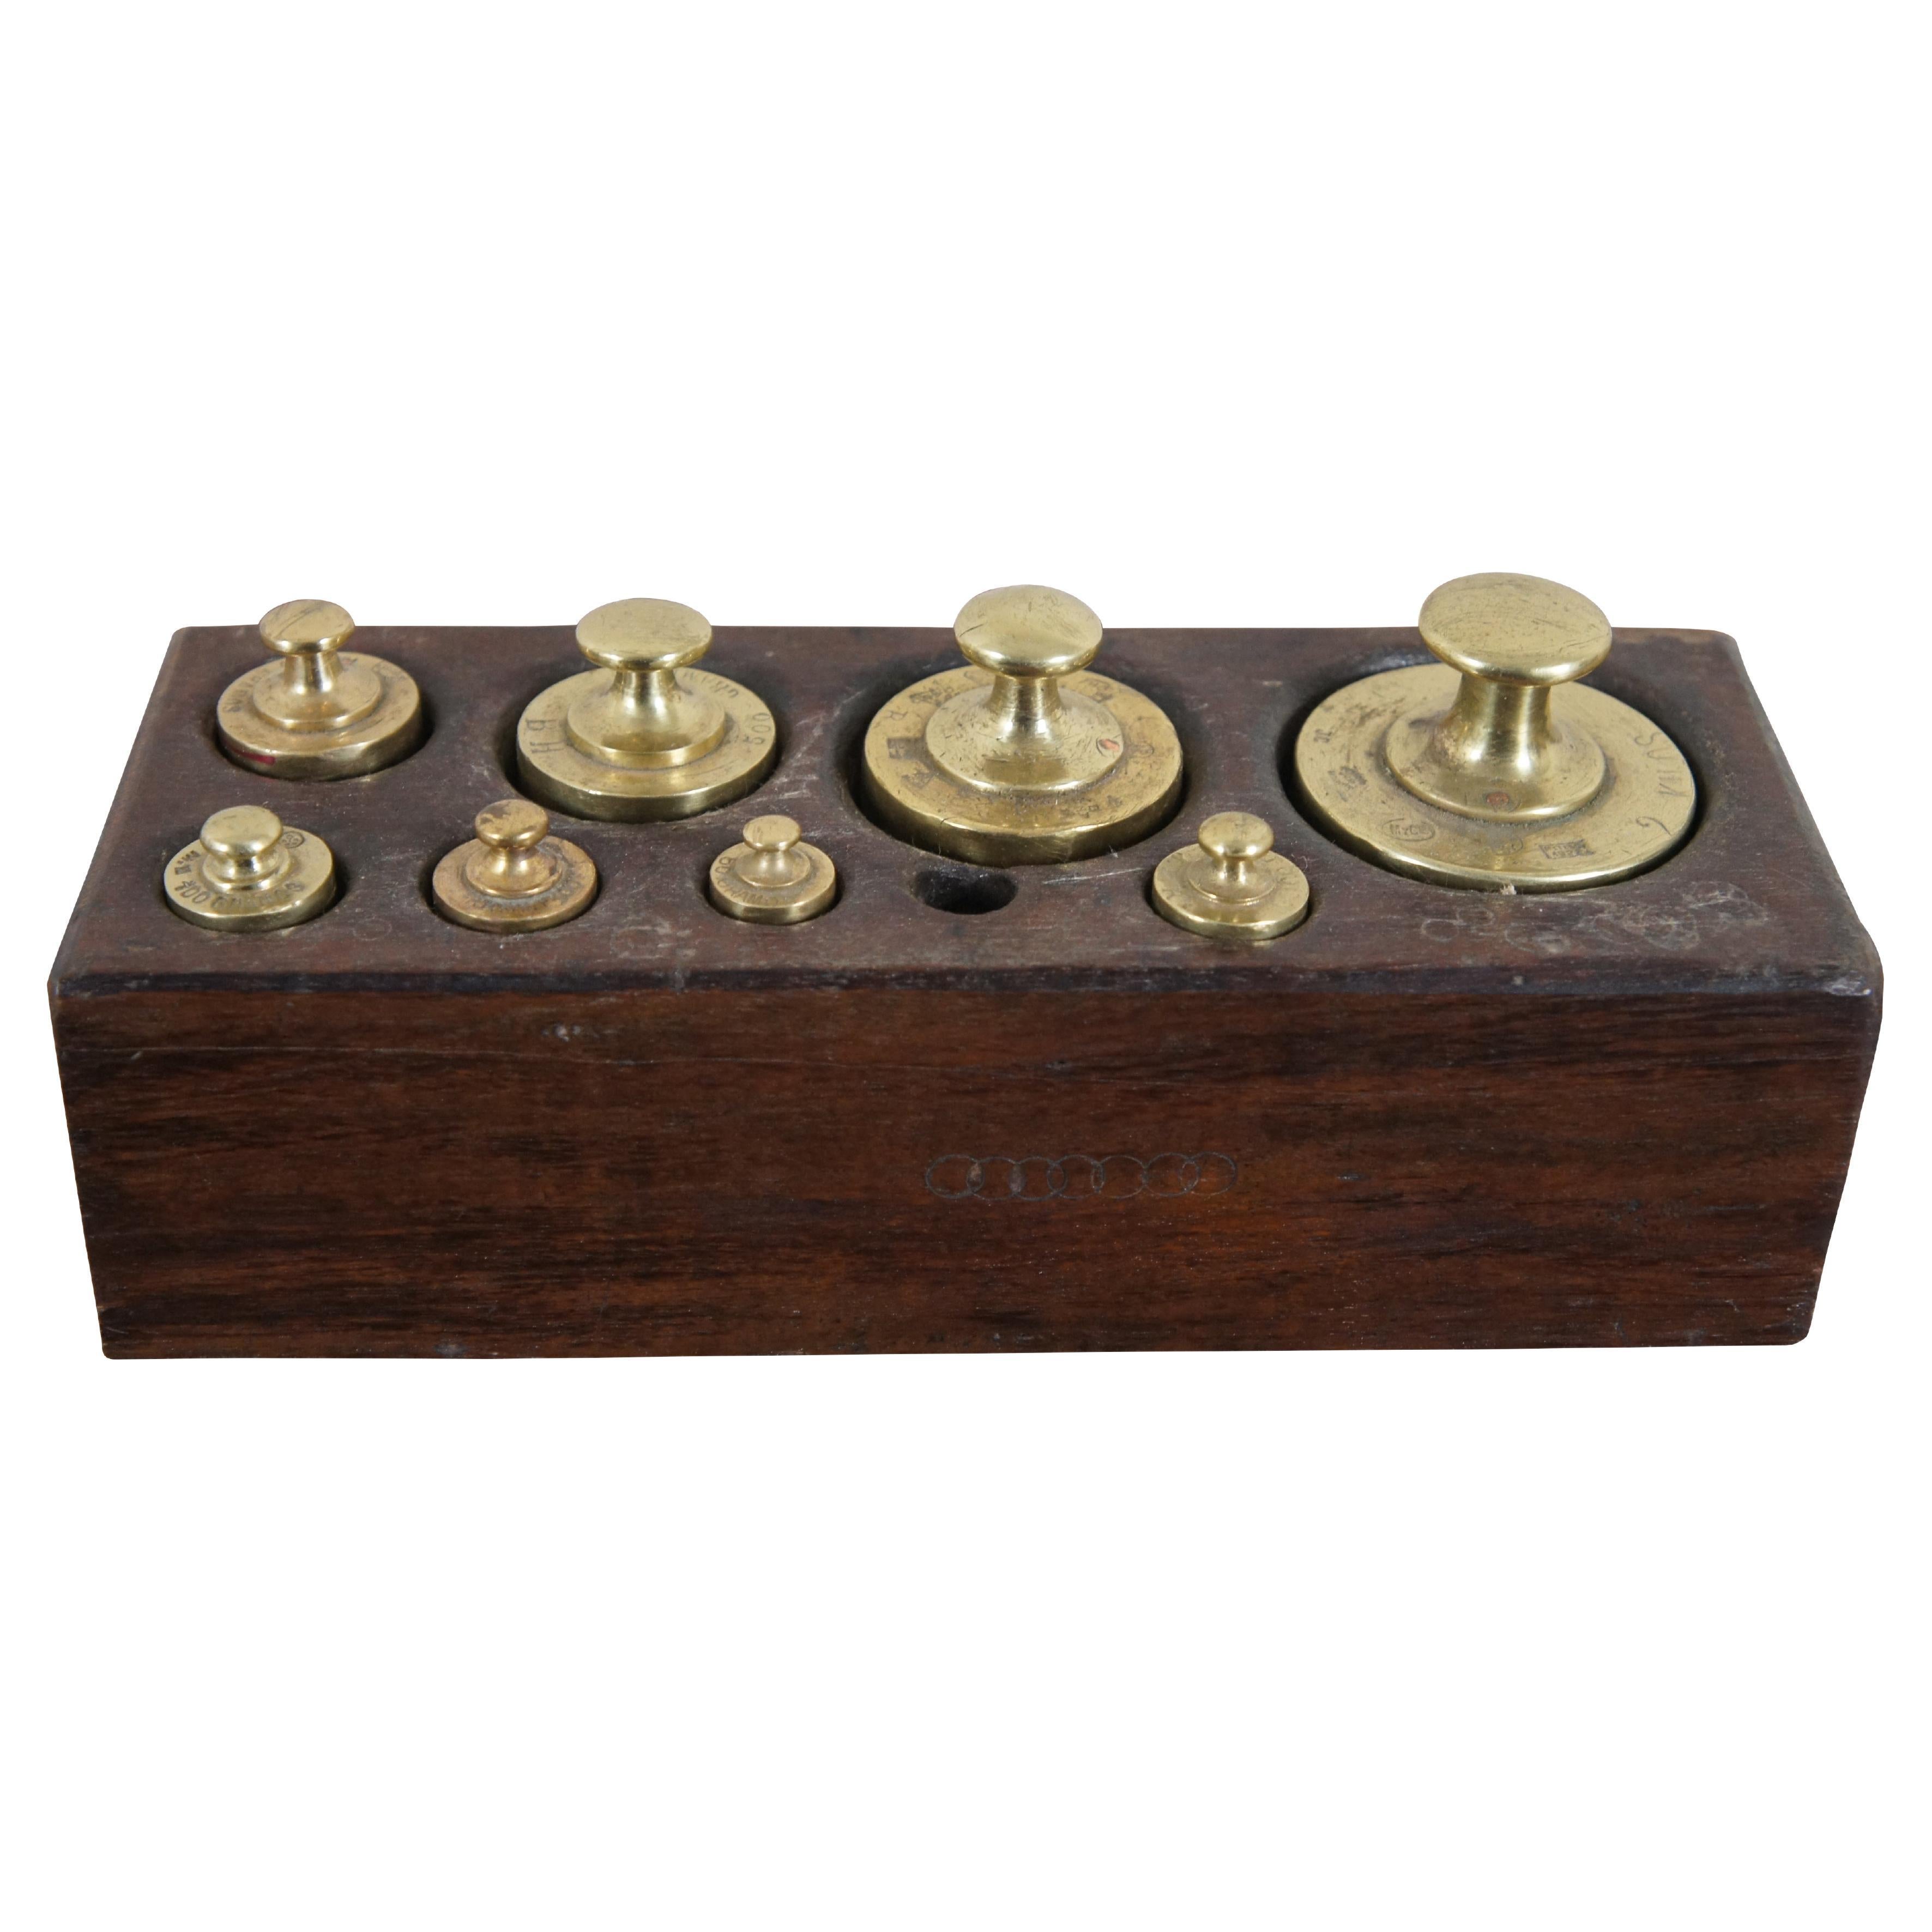 Set of 9 Antique Brass Scale Weights in Wood Block Apothecary 1920s